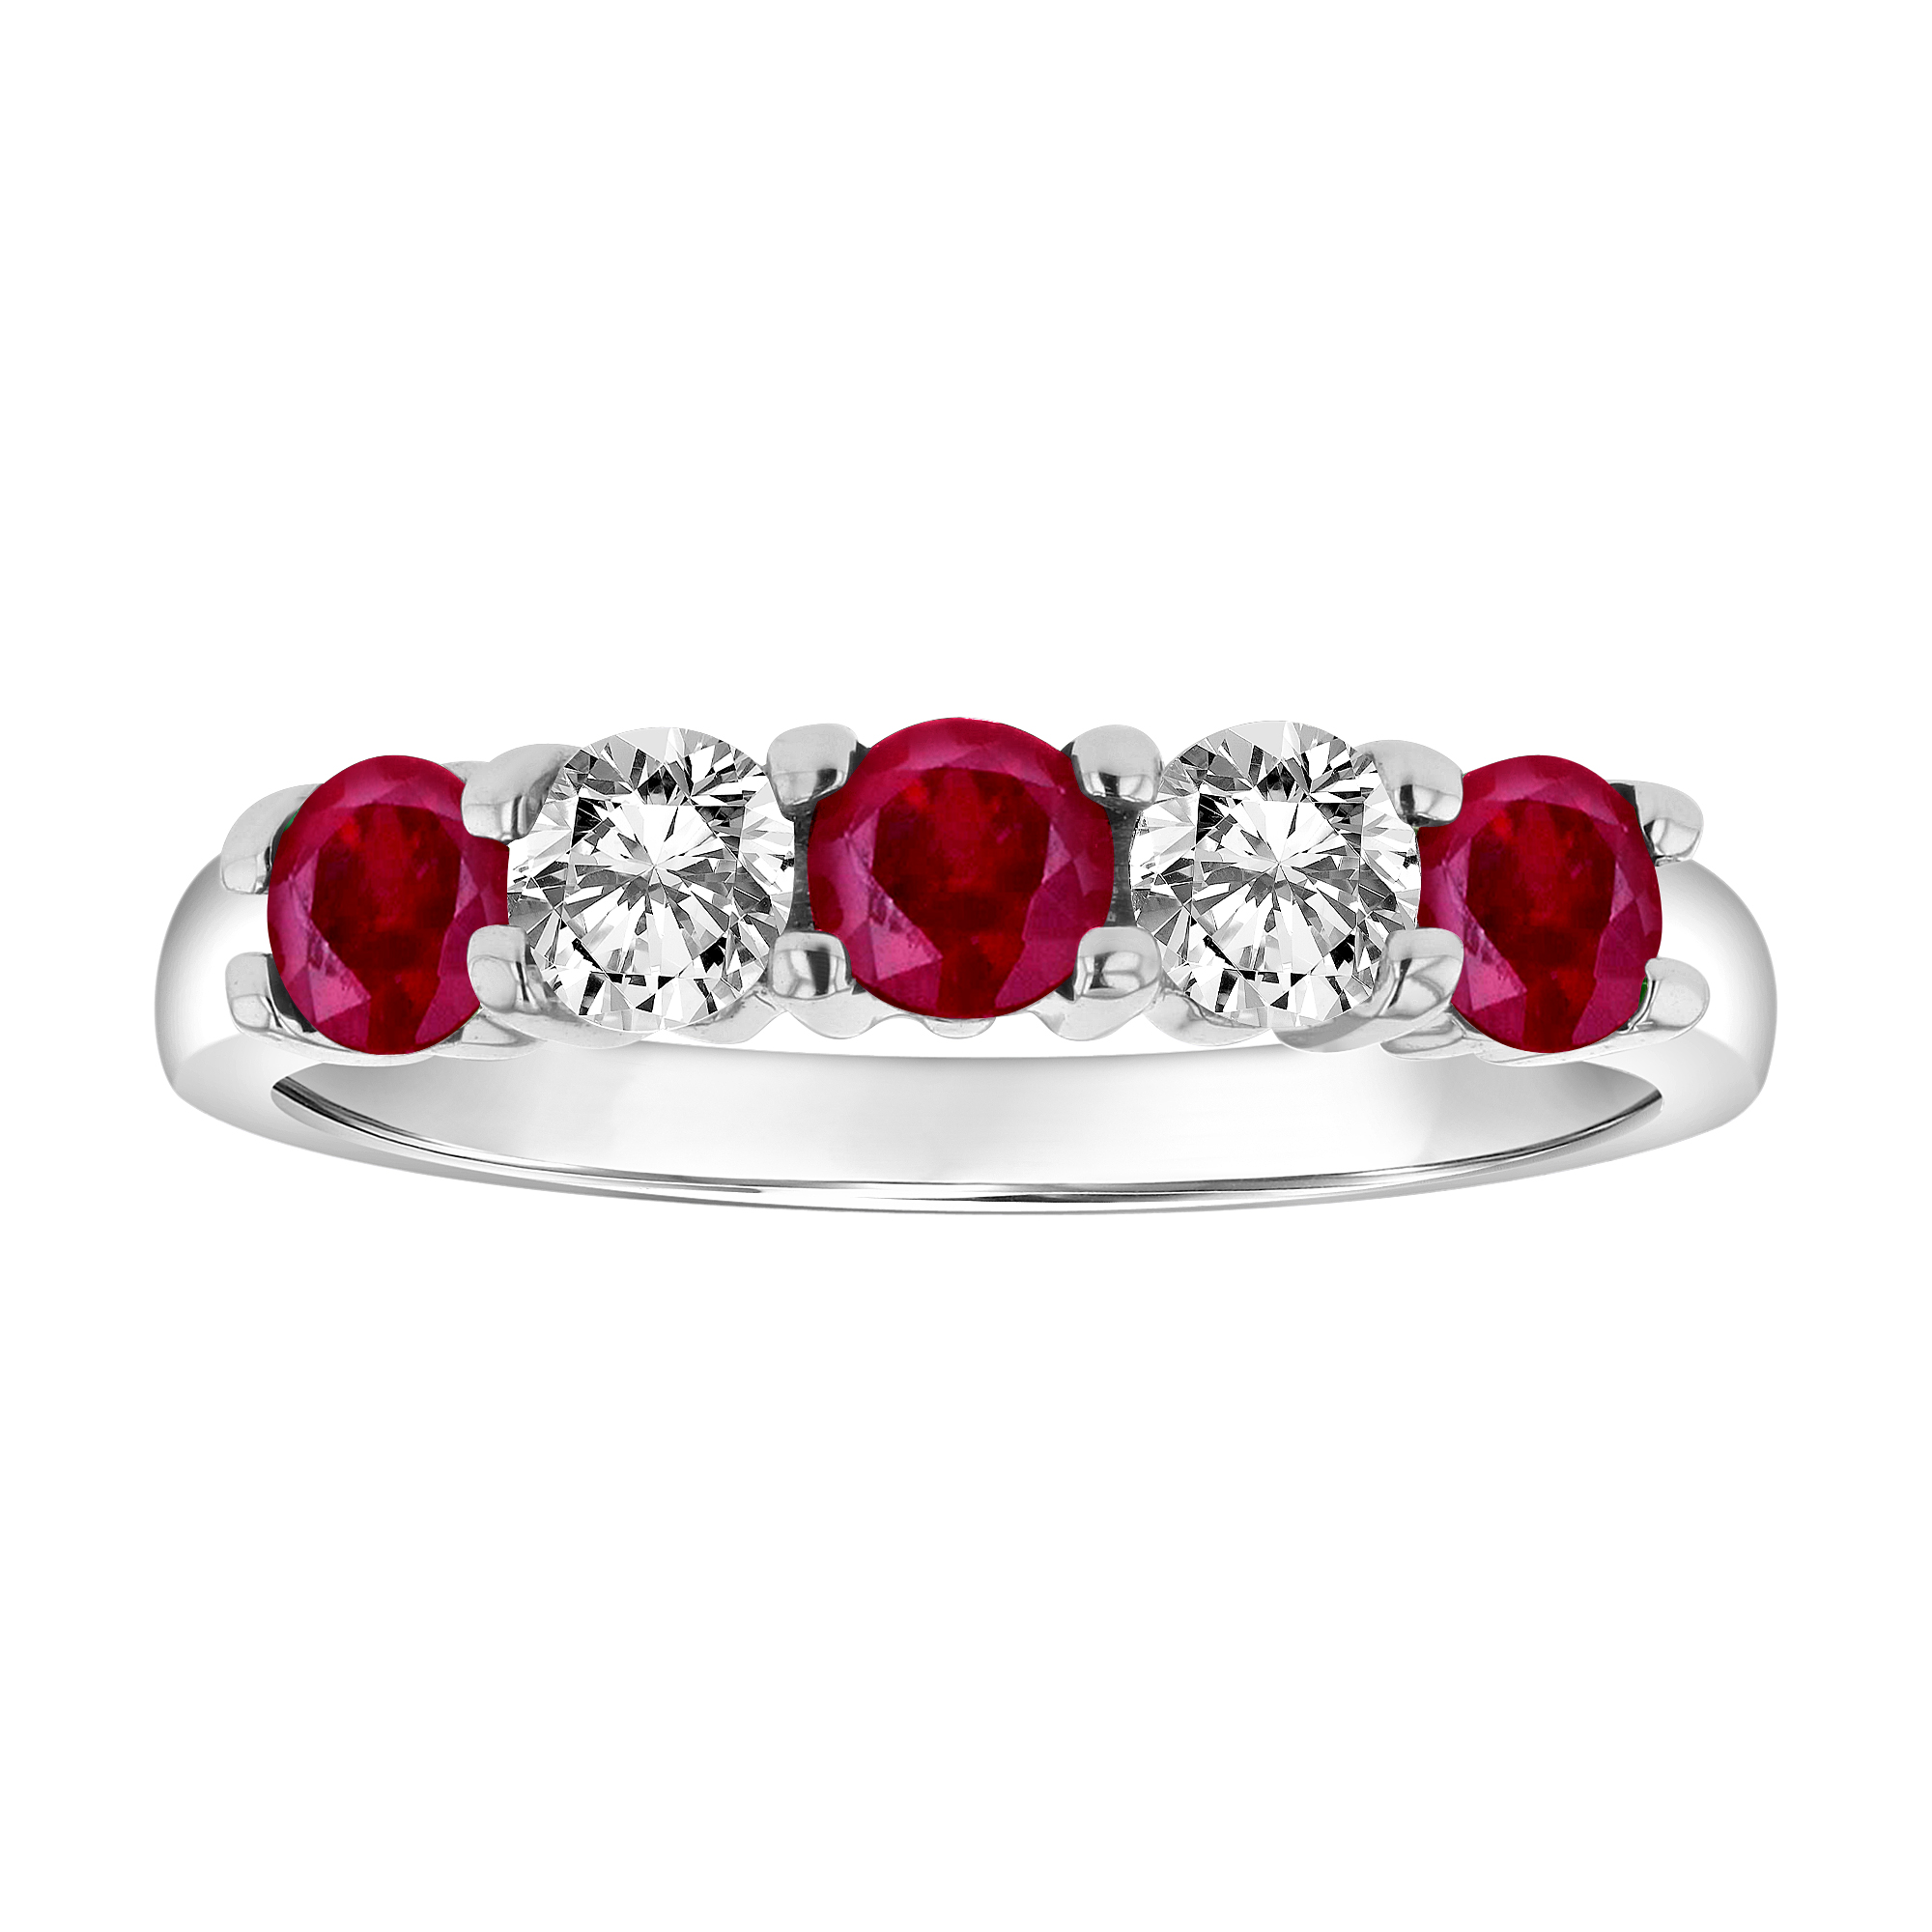 View 1.26cttw Natural Heated Ruby and Diamond Ring set in 14k Gold